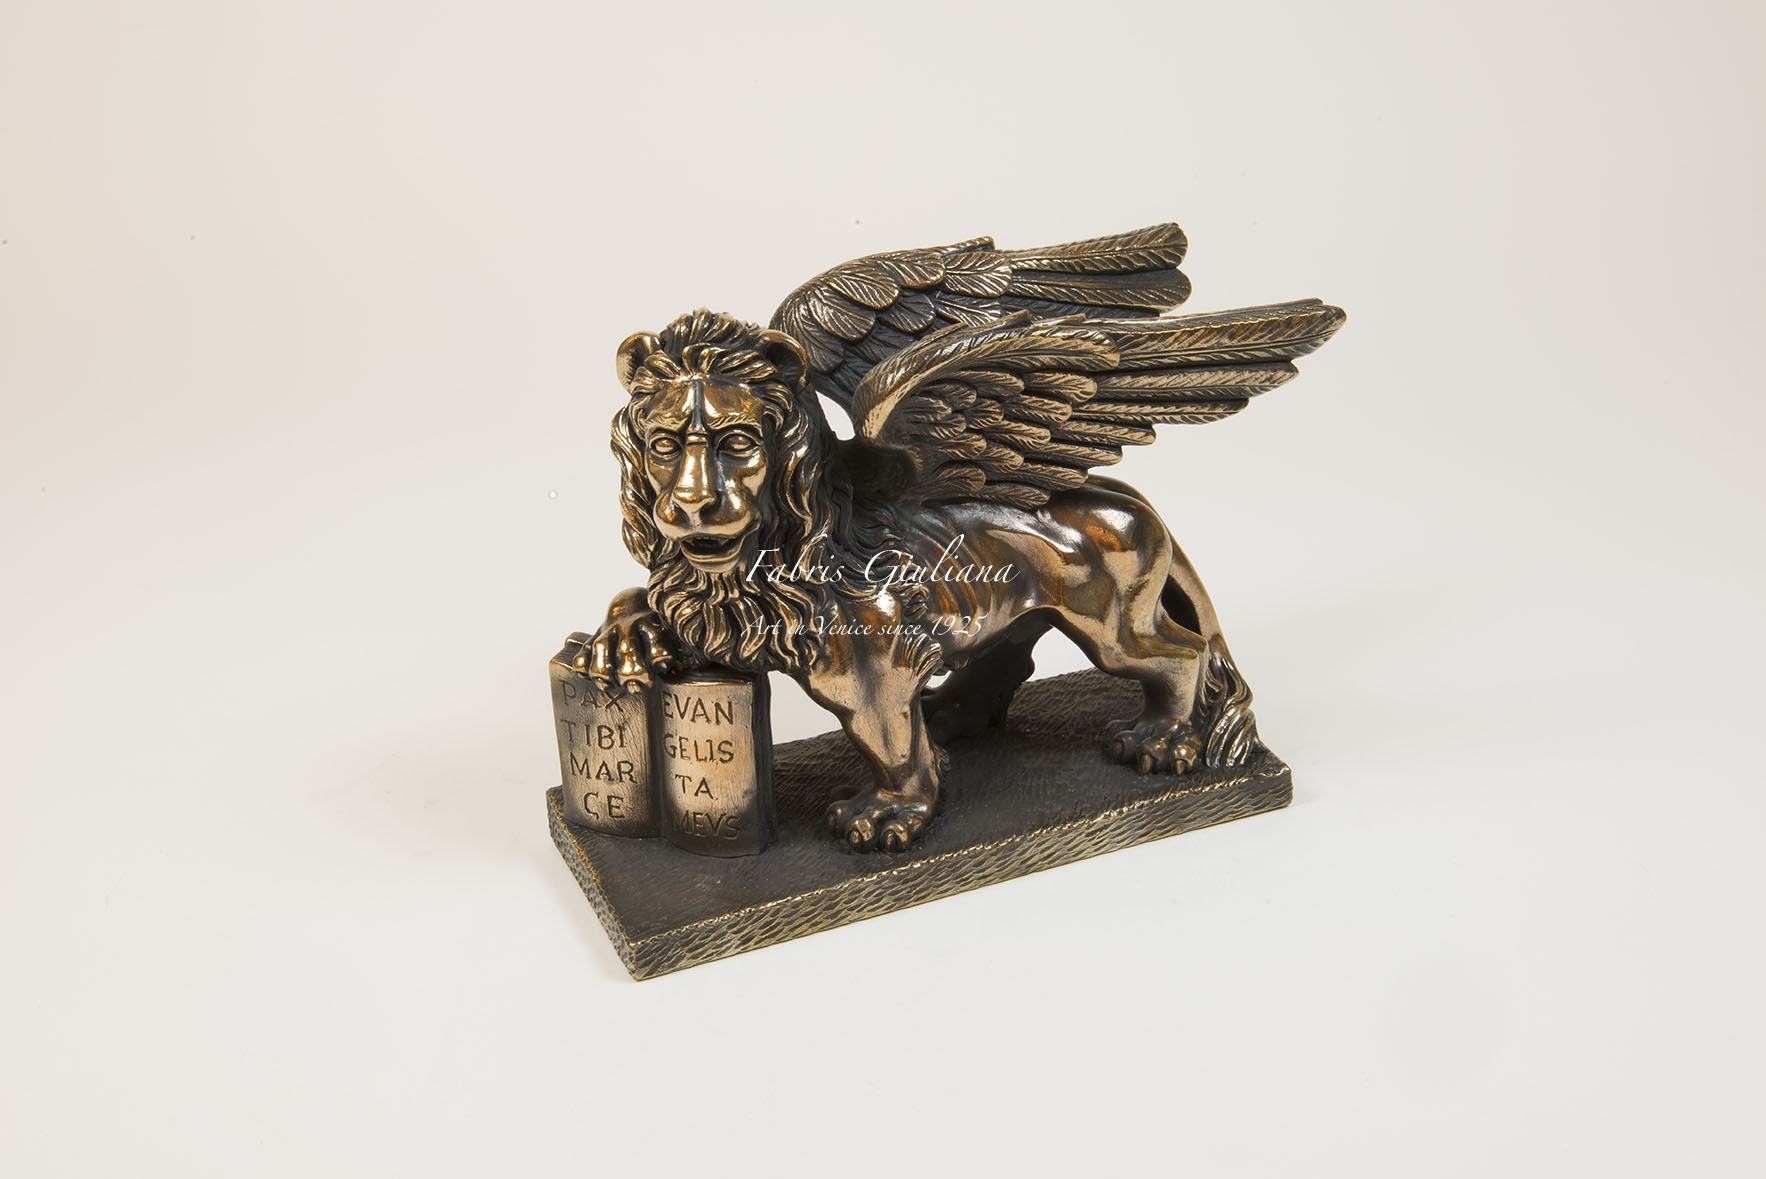 The Winget Lion of St Mark, symbol of Venice